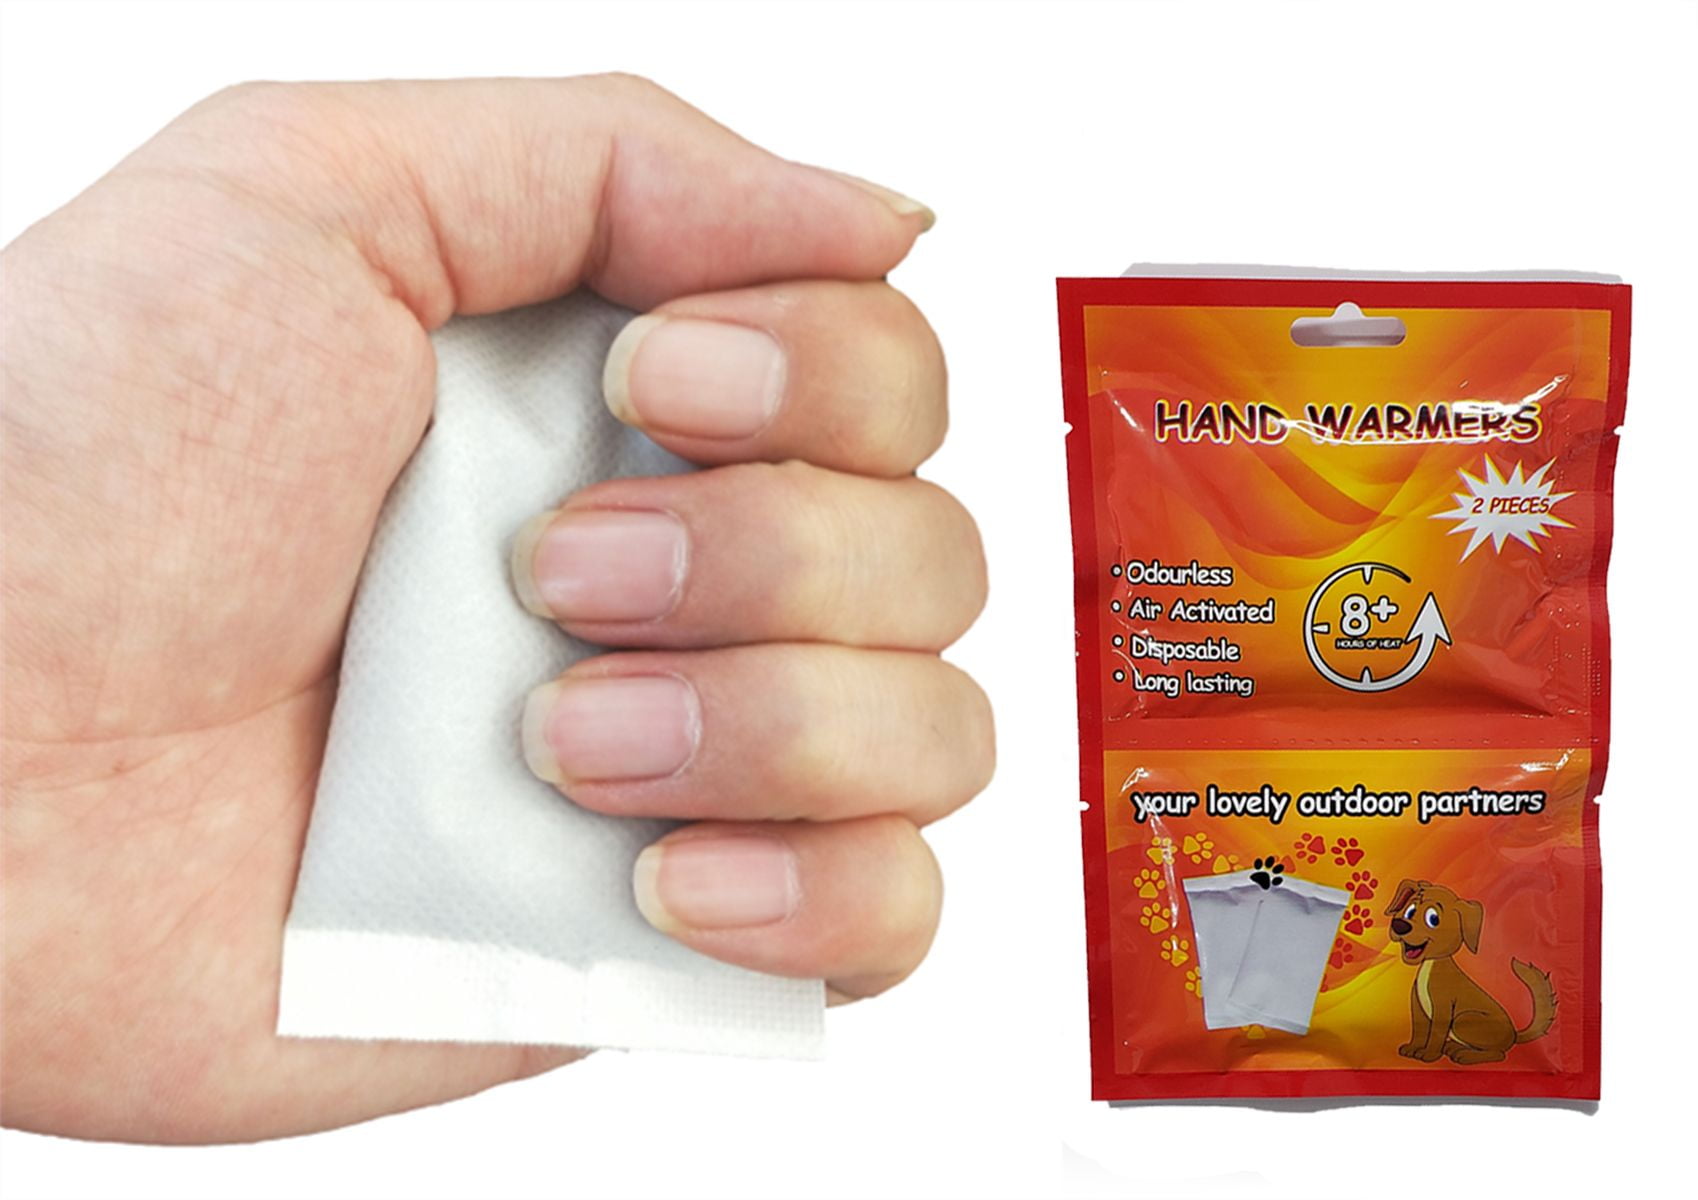 5-Pairs / 10 Warmers 8 Hours of Continuous Heat Safe and Odorless TSA Approved Air Activated Heating Packs for Hands Toes and Body Hand & Body Warmers